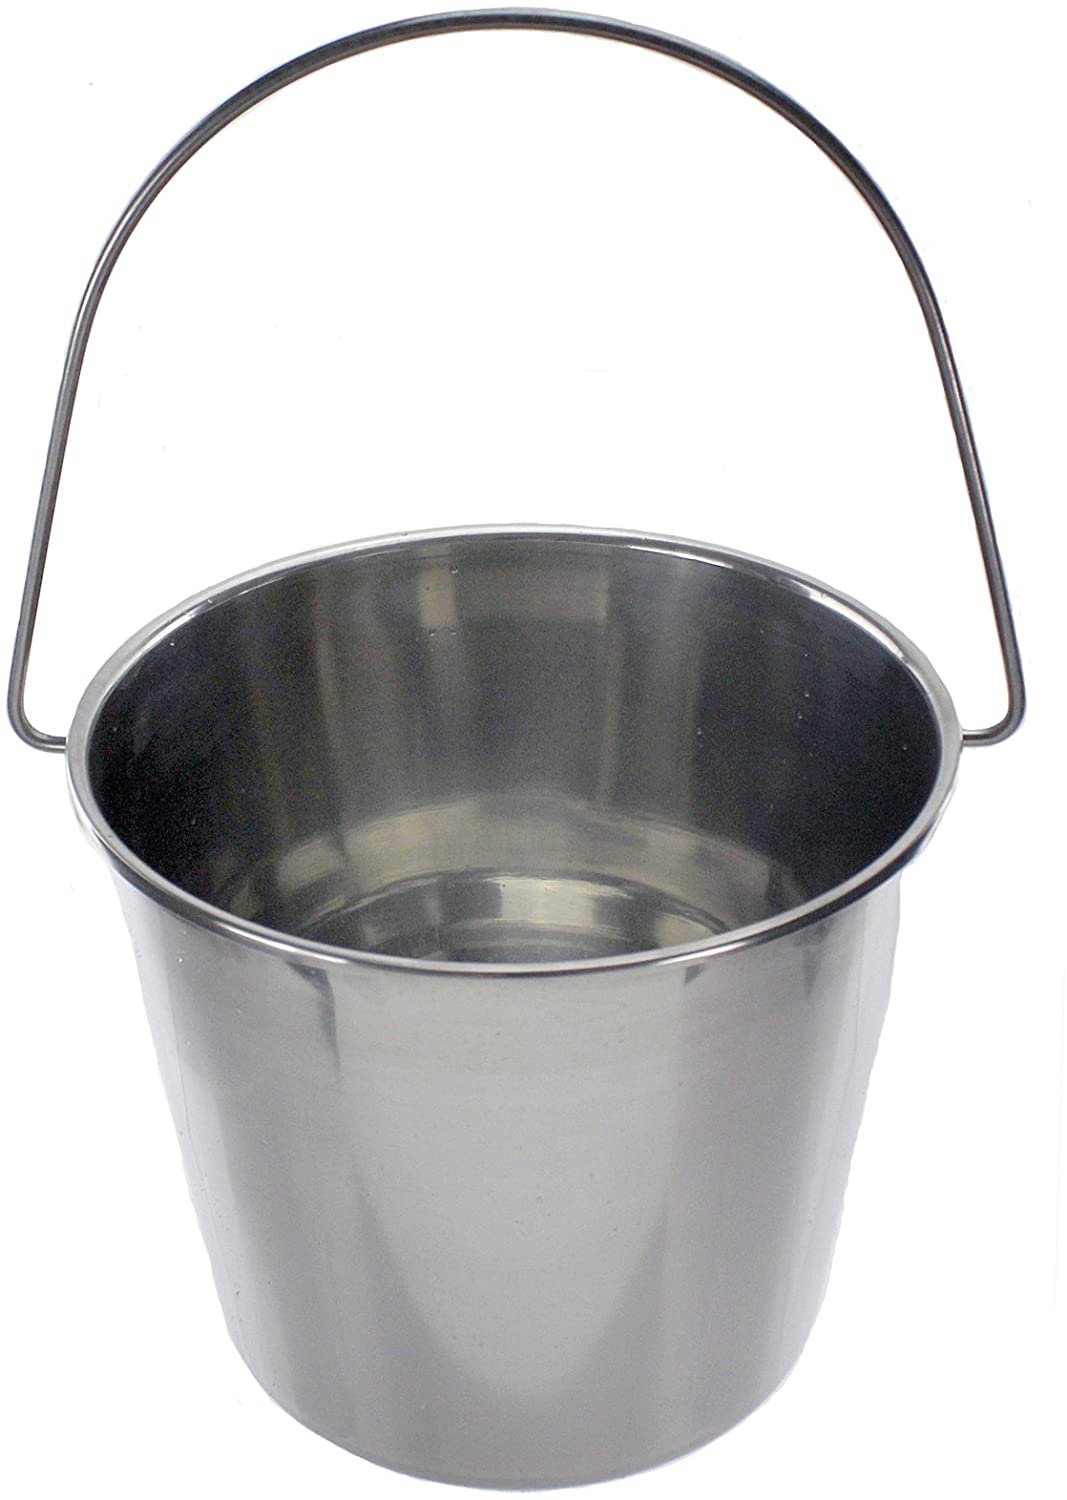 12 Litre Stainless Steel Handled Pail Bucket for BBQ / Barbecue (Silver, Set of 2 Buckets)